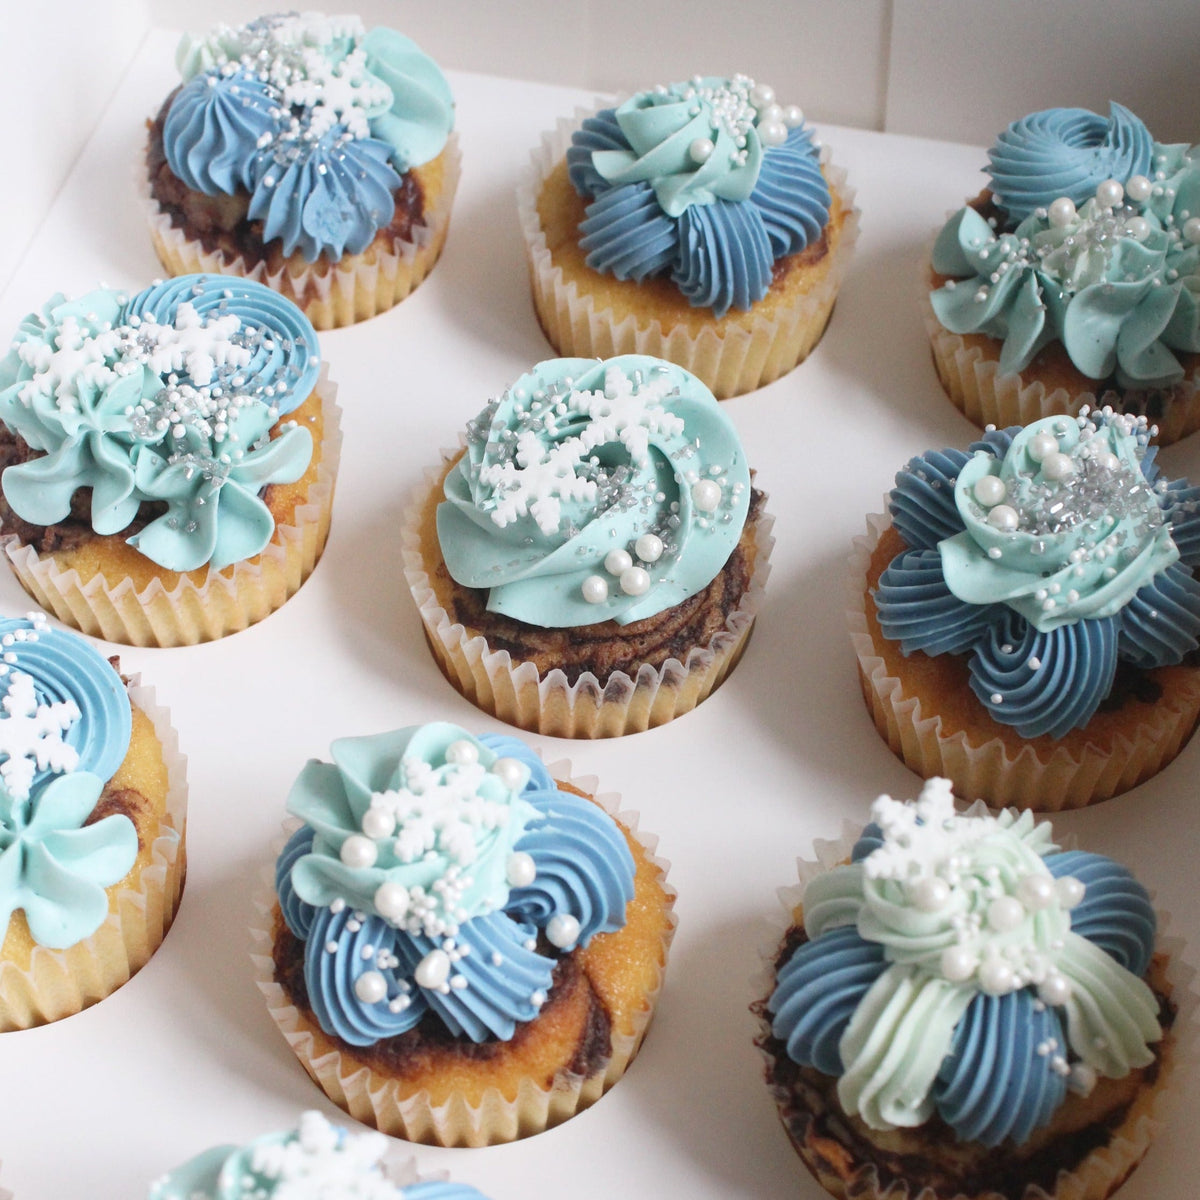 Cupcakes - the small sweet treats with gorgeous blue buttercream piping!